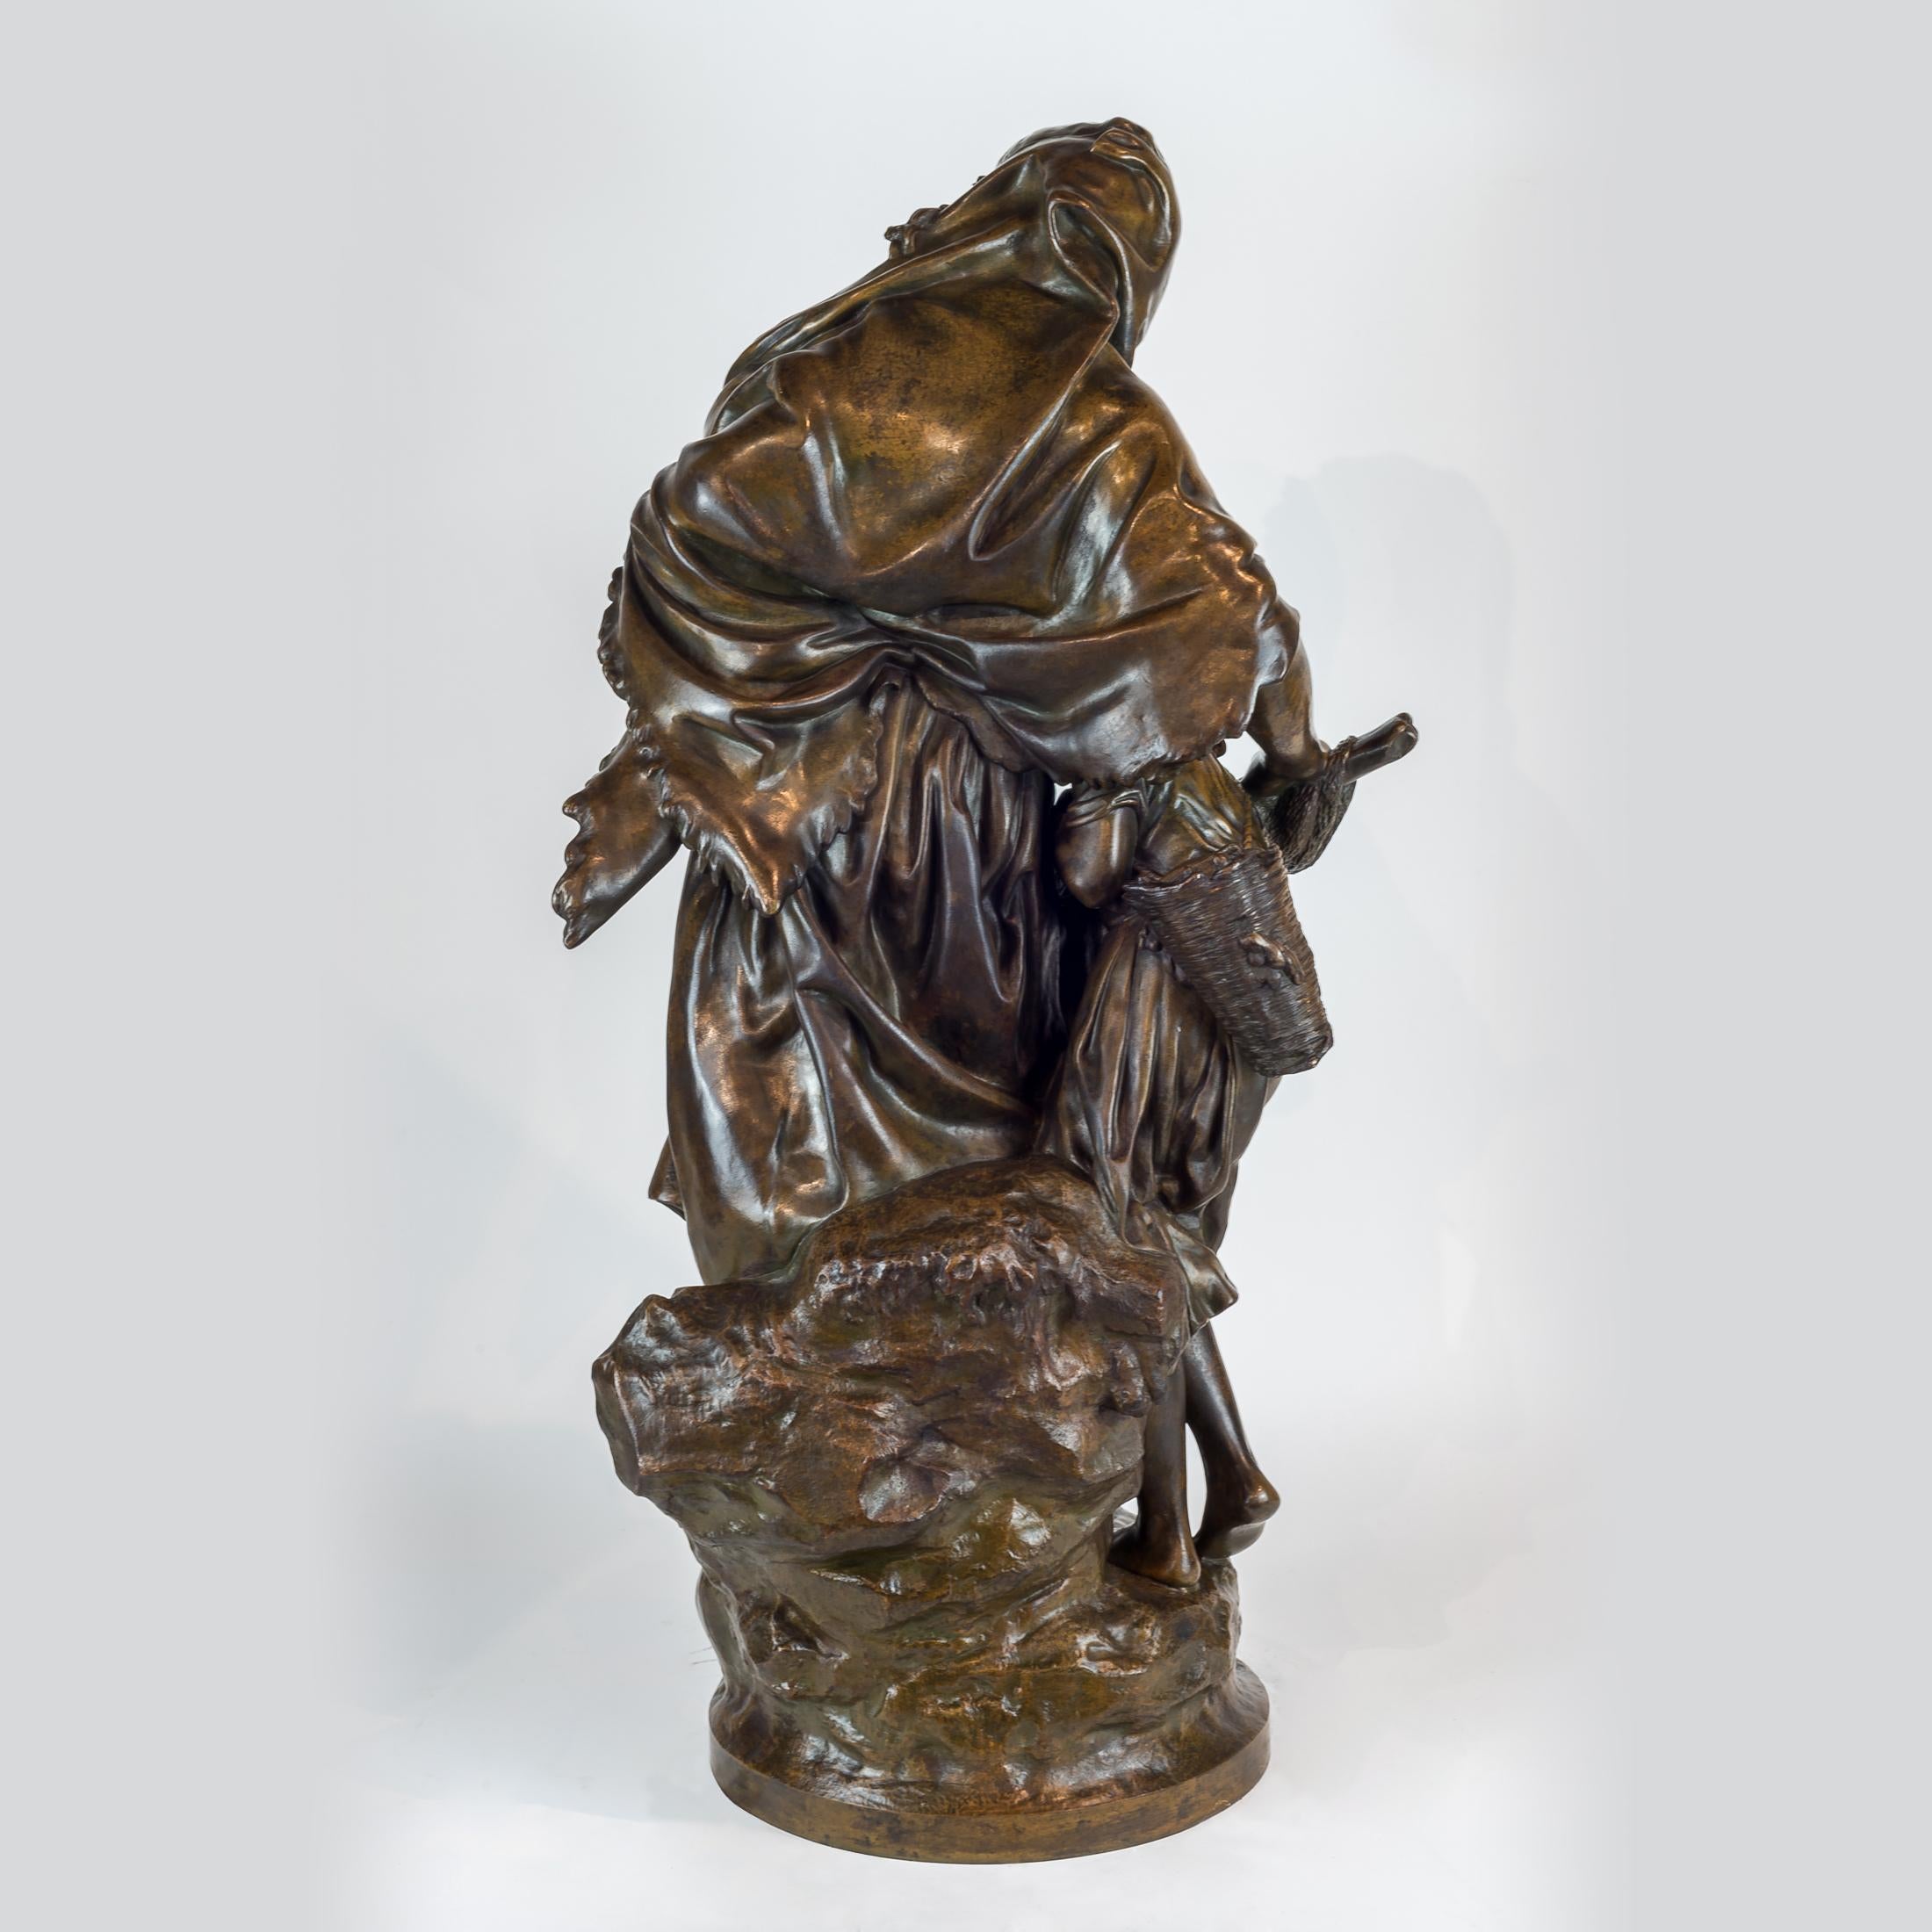 French 19th Century Patinated Bronze Sculpture of Mother and Child by Mathurin Moreau